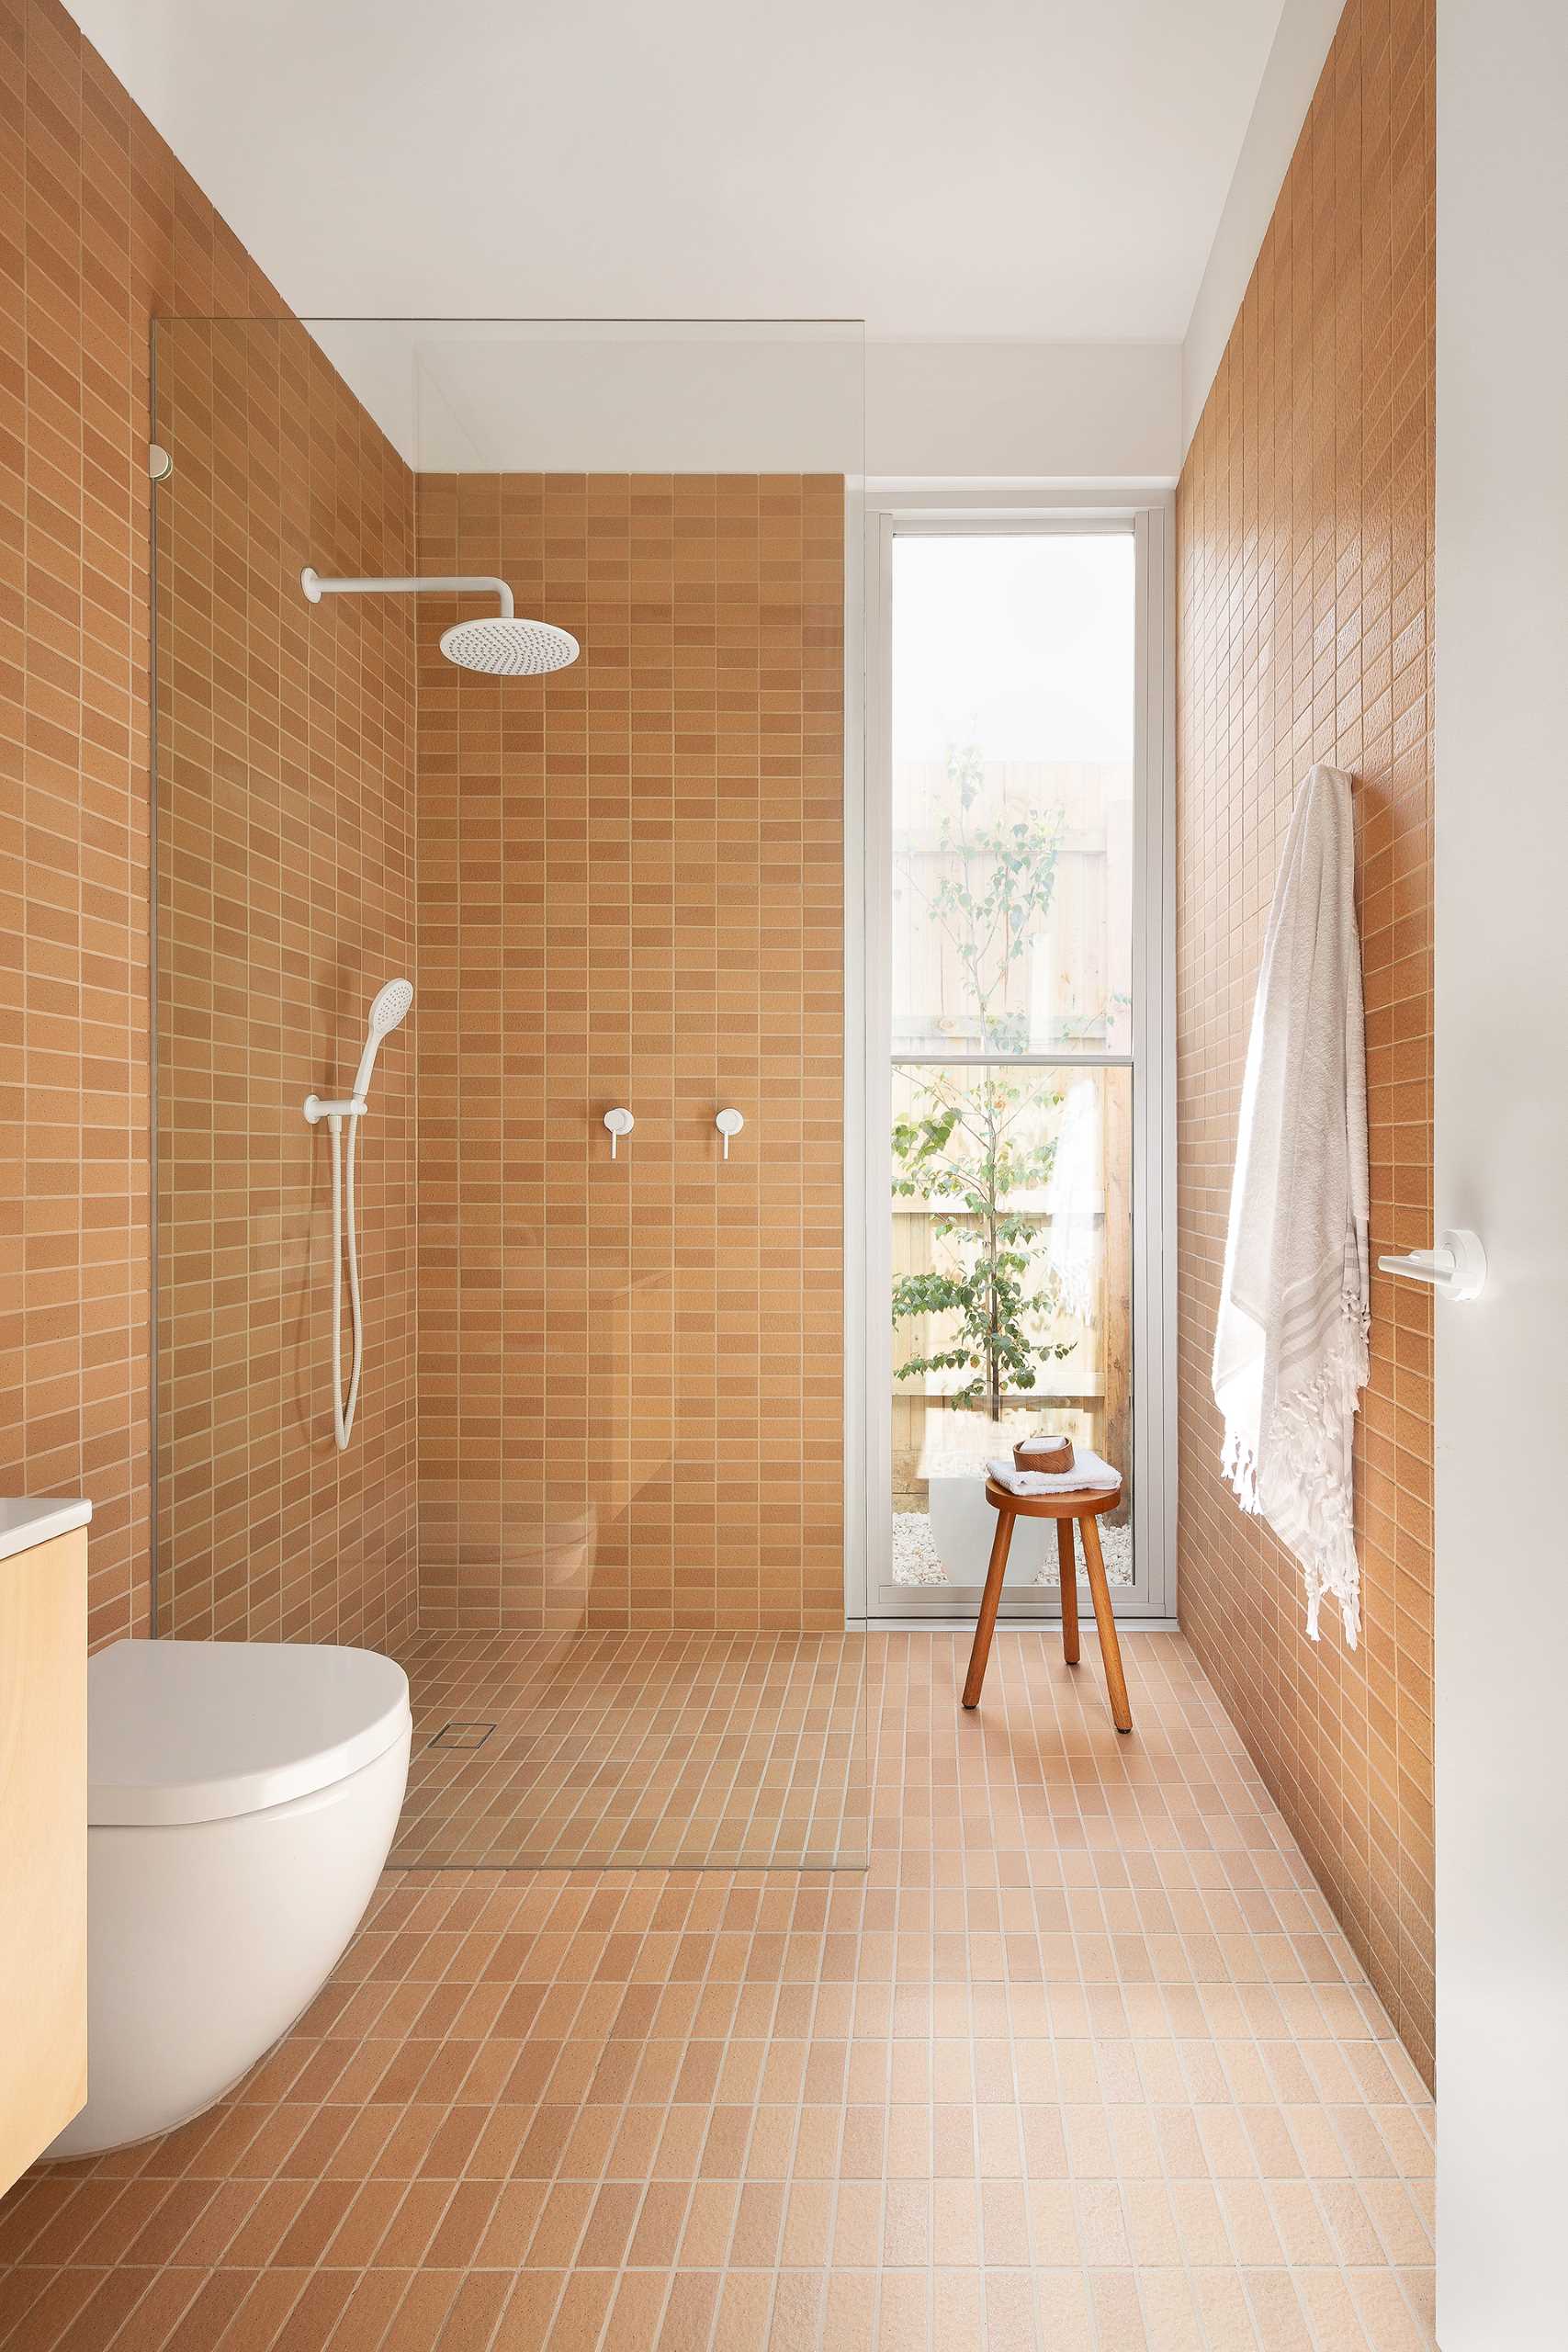 In this modern bathroom, textural Japanese tiles in a terracotta color were chosen to reflect an earthiness, while the crisp white fixtures add freshness, lightness, and a contrasting element.